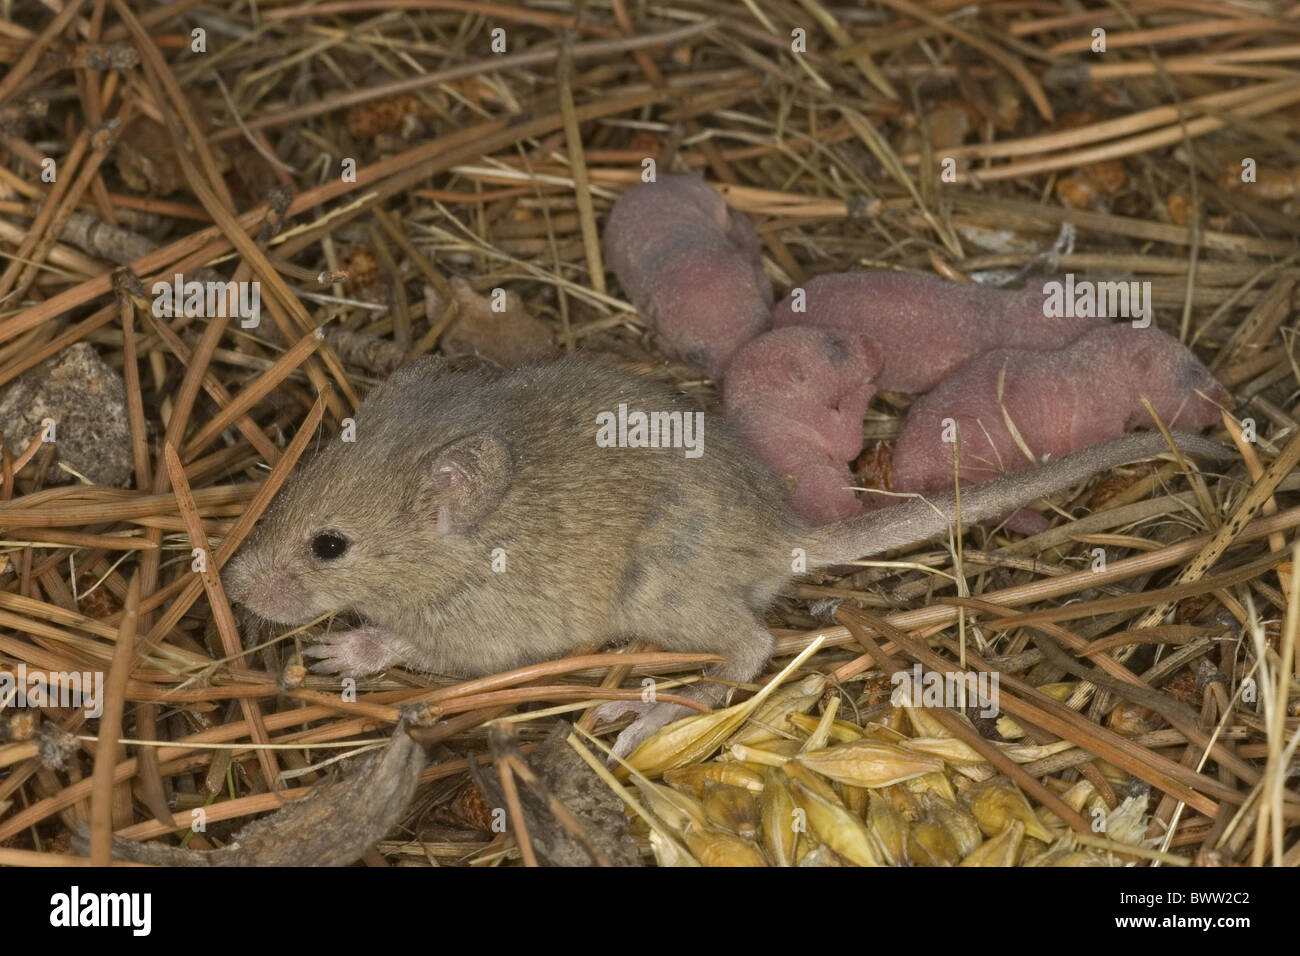 House Mouse Mus musculus adult nest with babies Stock Photo